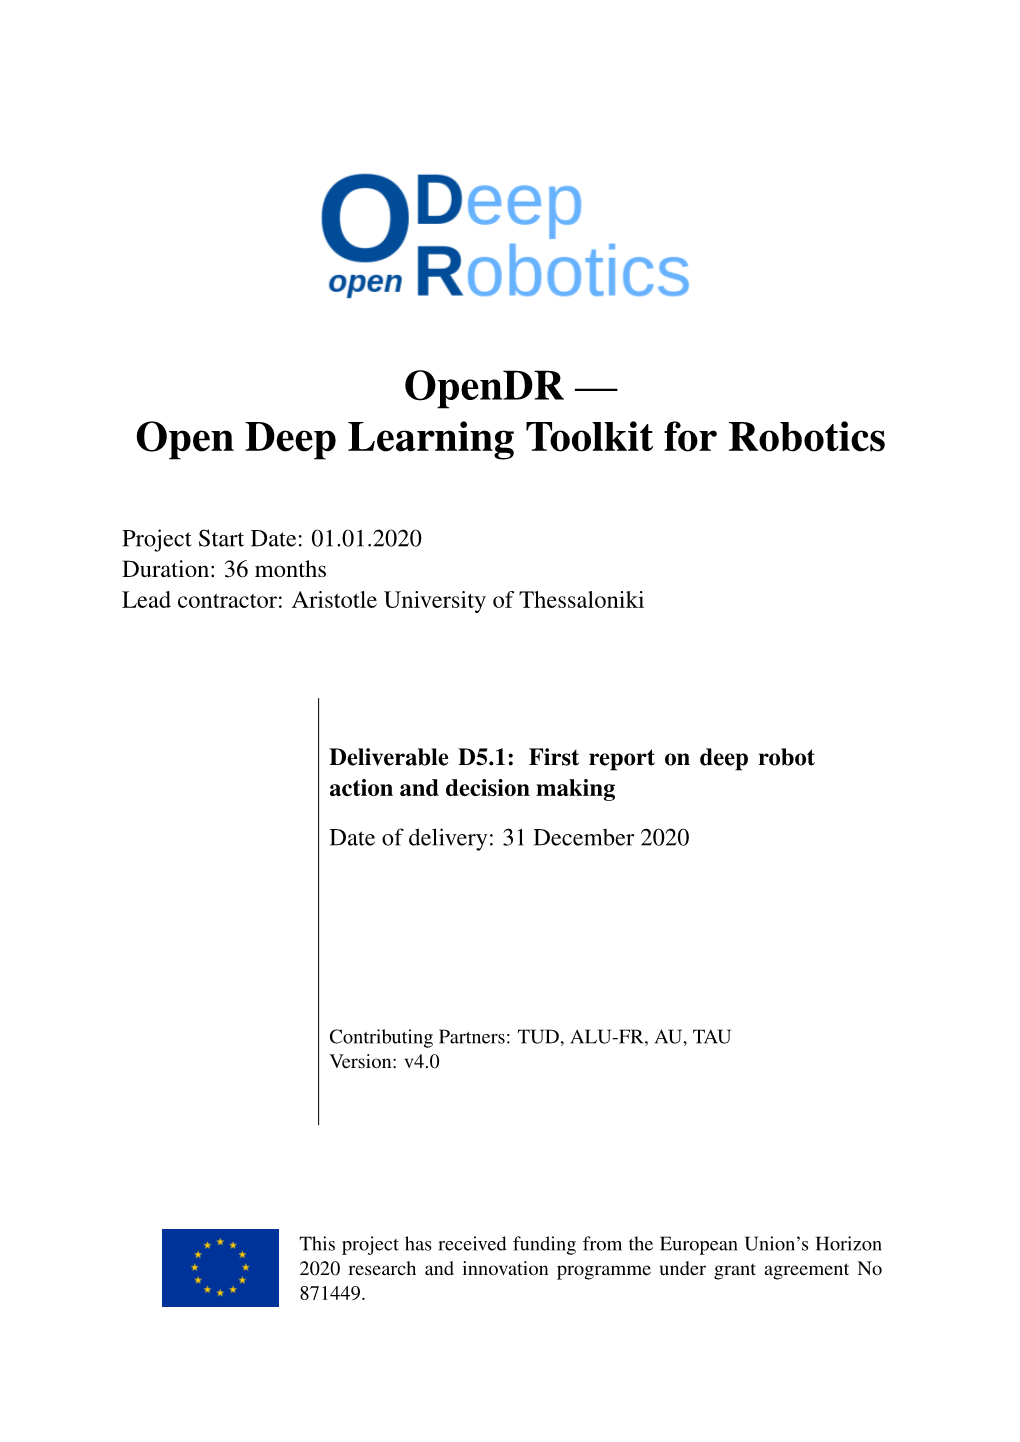 Opendr — Open Deep Learning Toolkit for Robotics